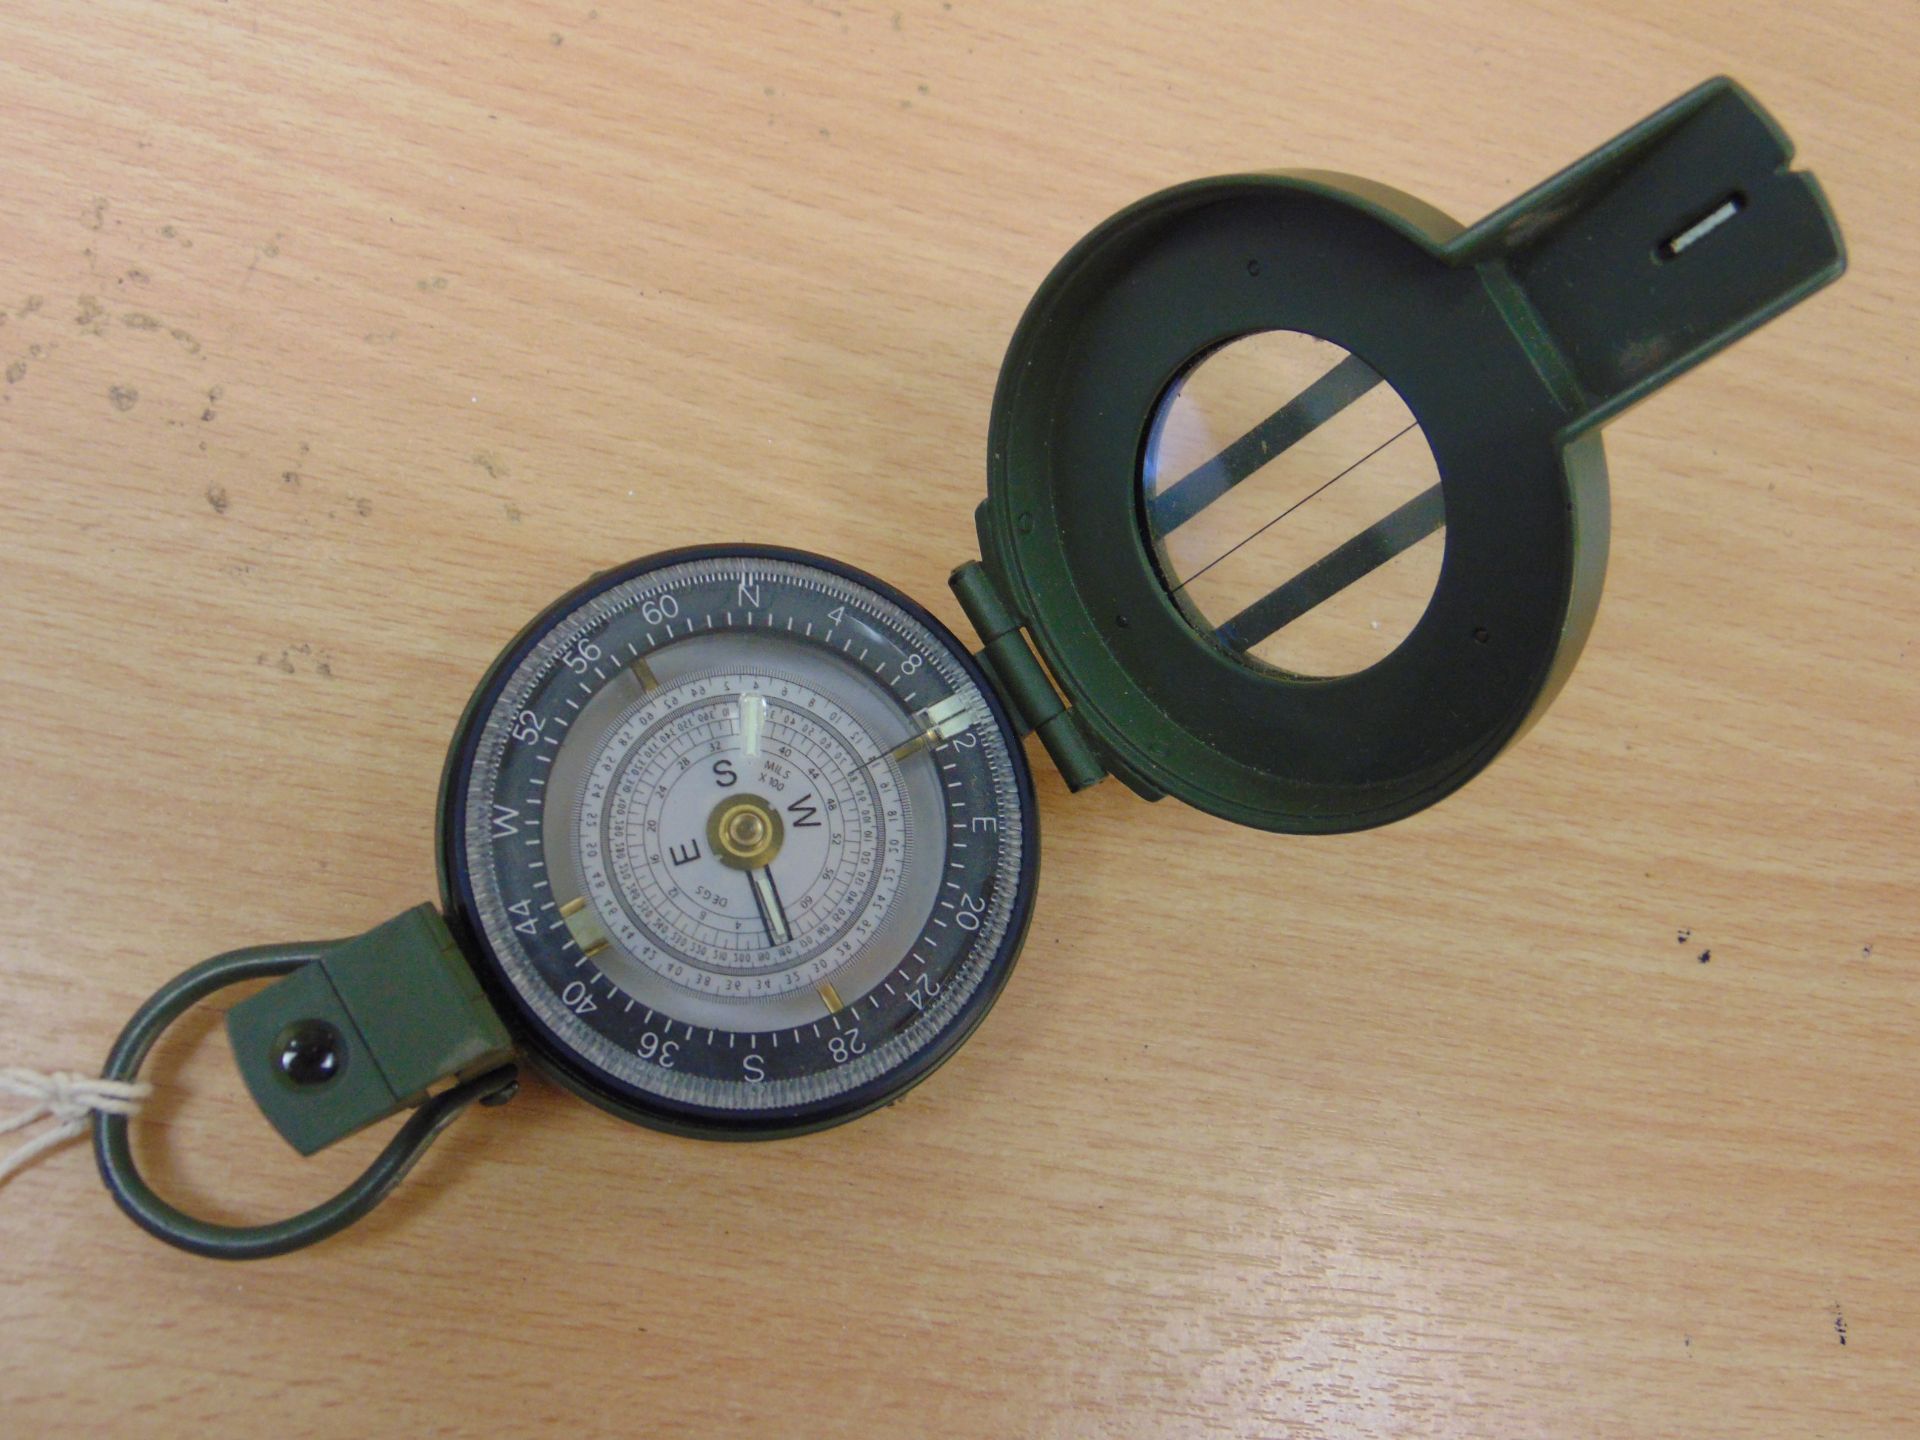 FRANCIS BARKER M88 PRISMATIC COMPASS NATO MARKS BRITISH ARMY ISSUED - Image 2 of 6